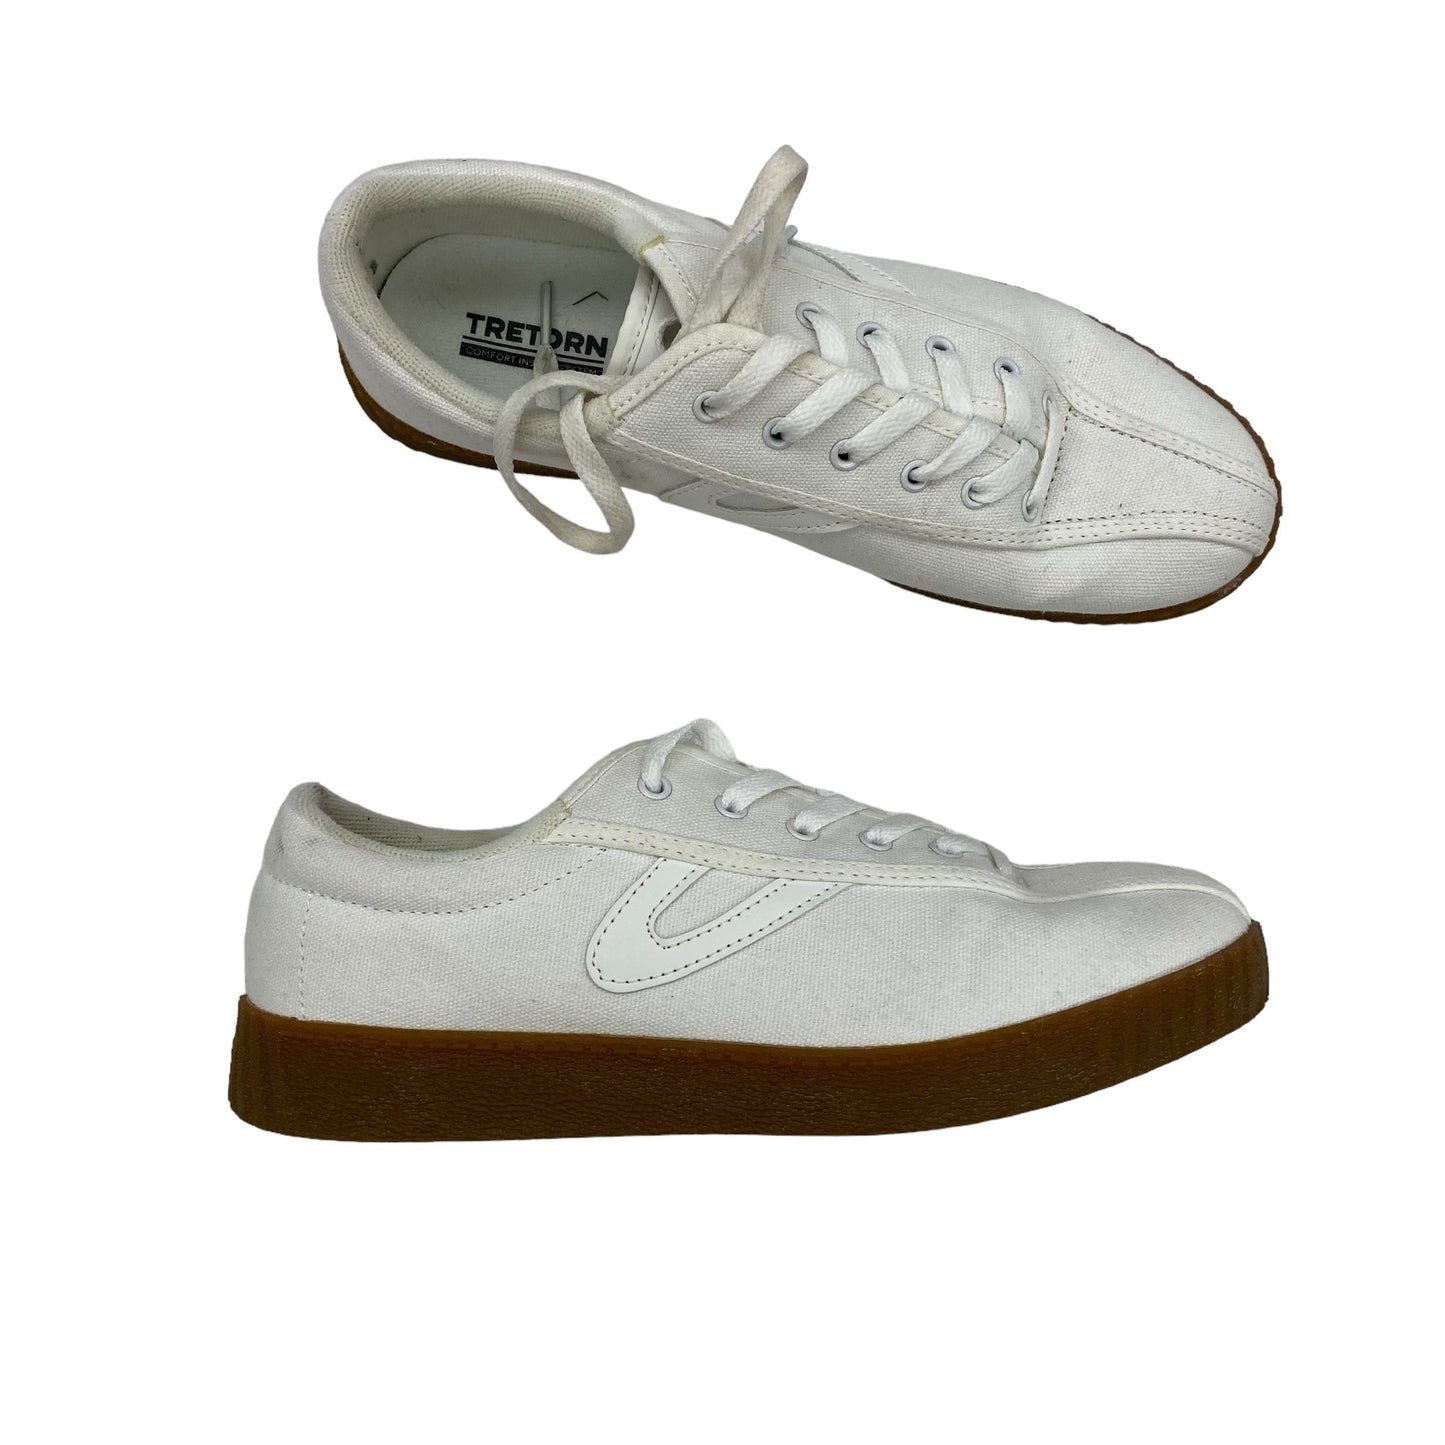 WHITE SHOES SNEAKERS by CLOTHES MENTOR Size:9